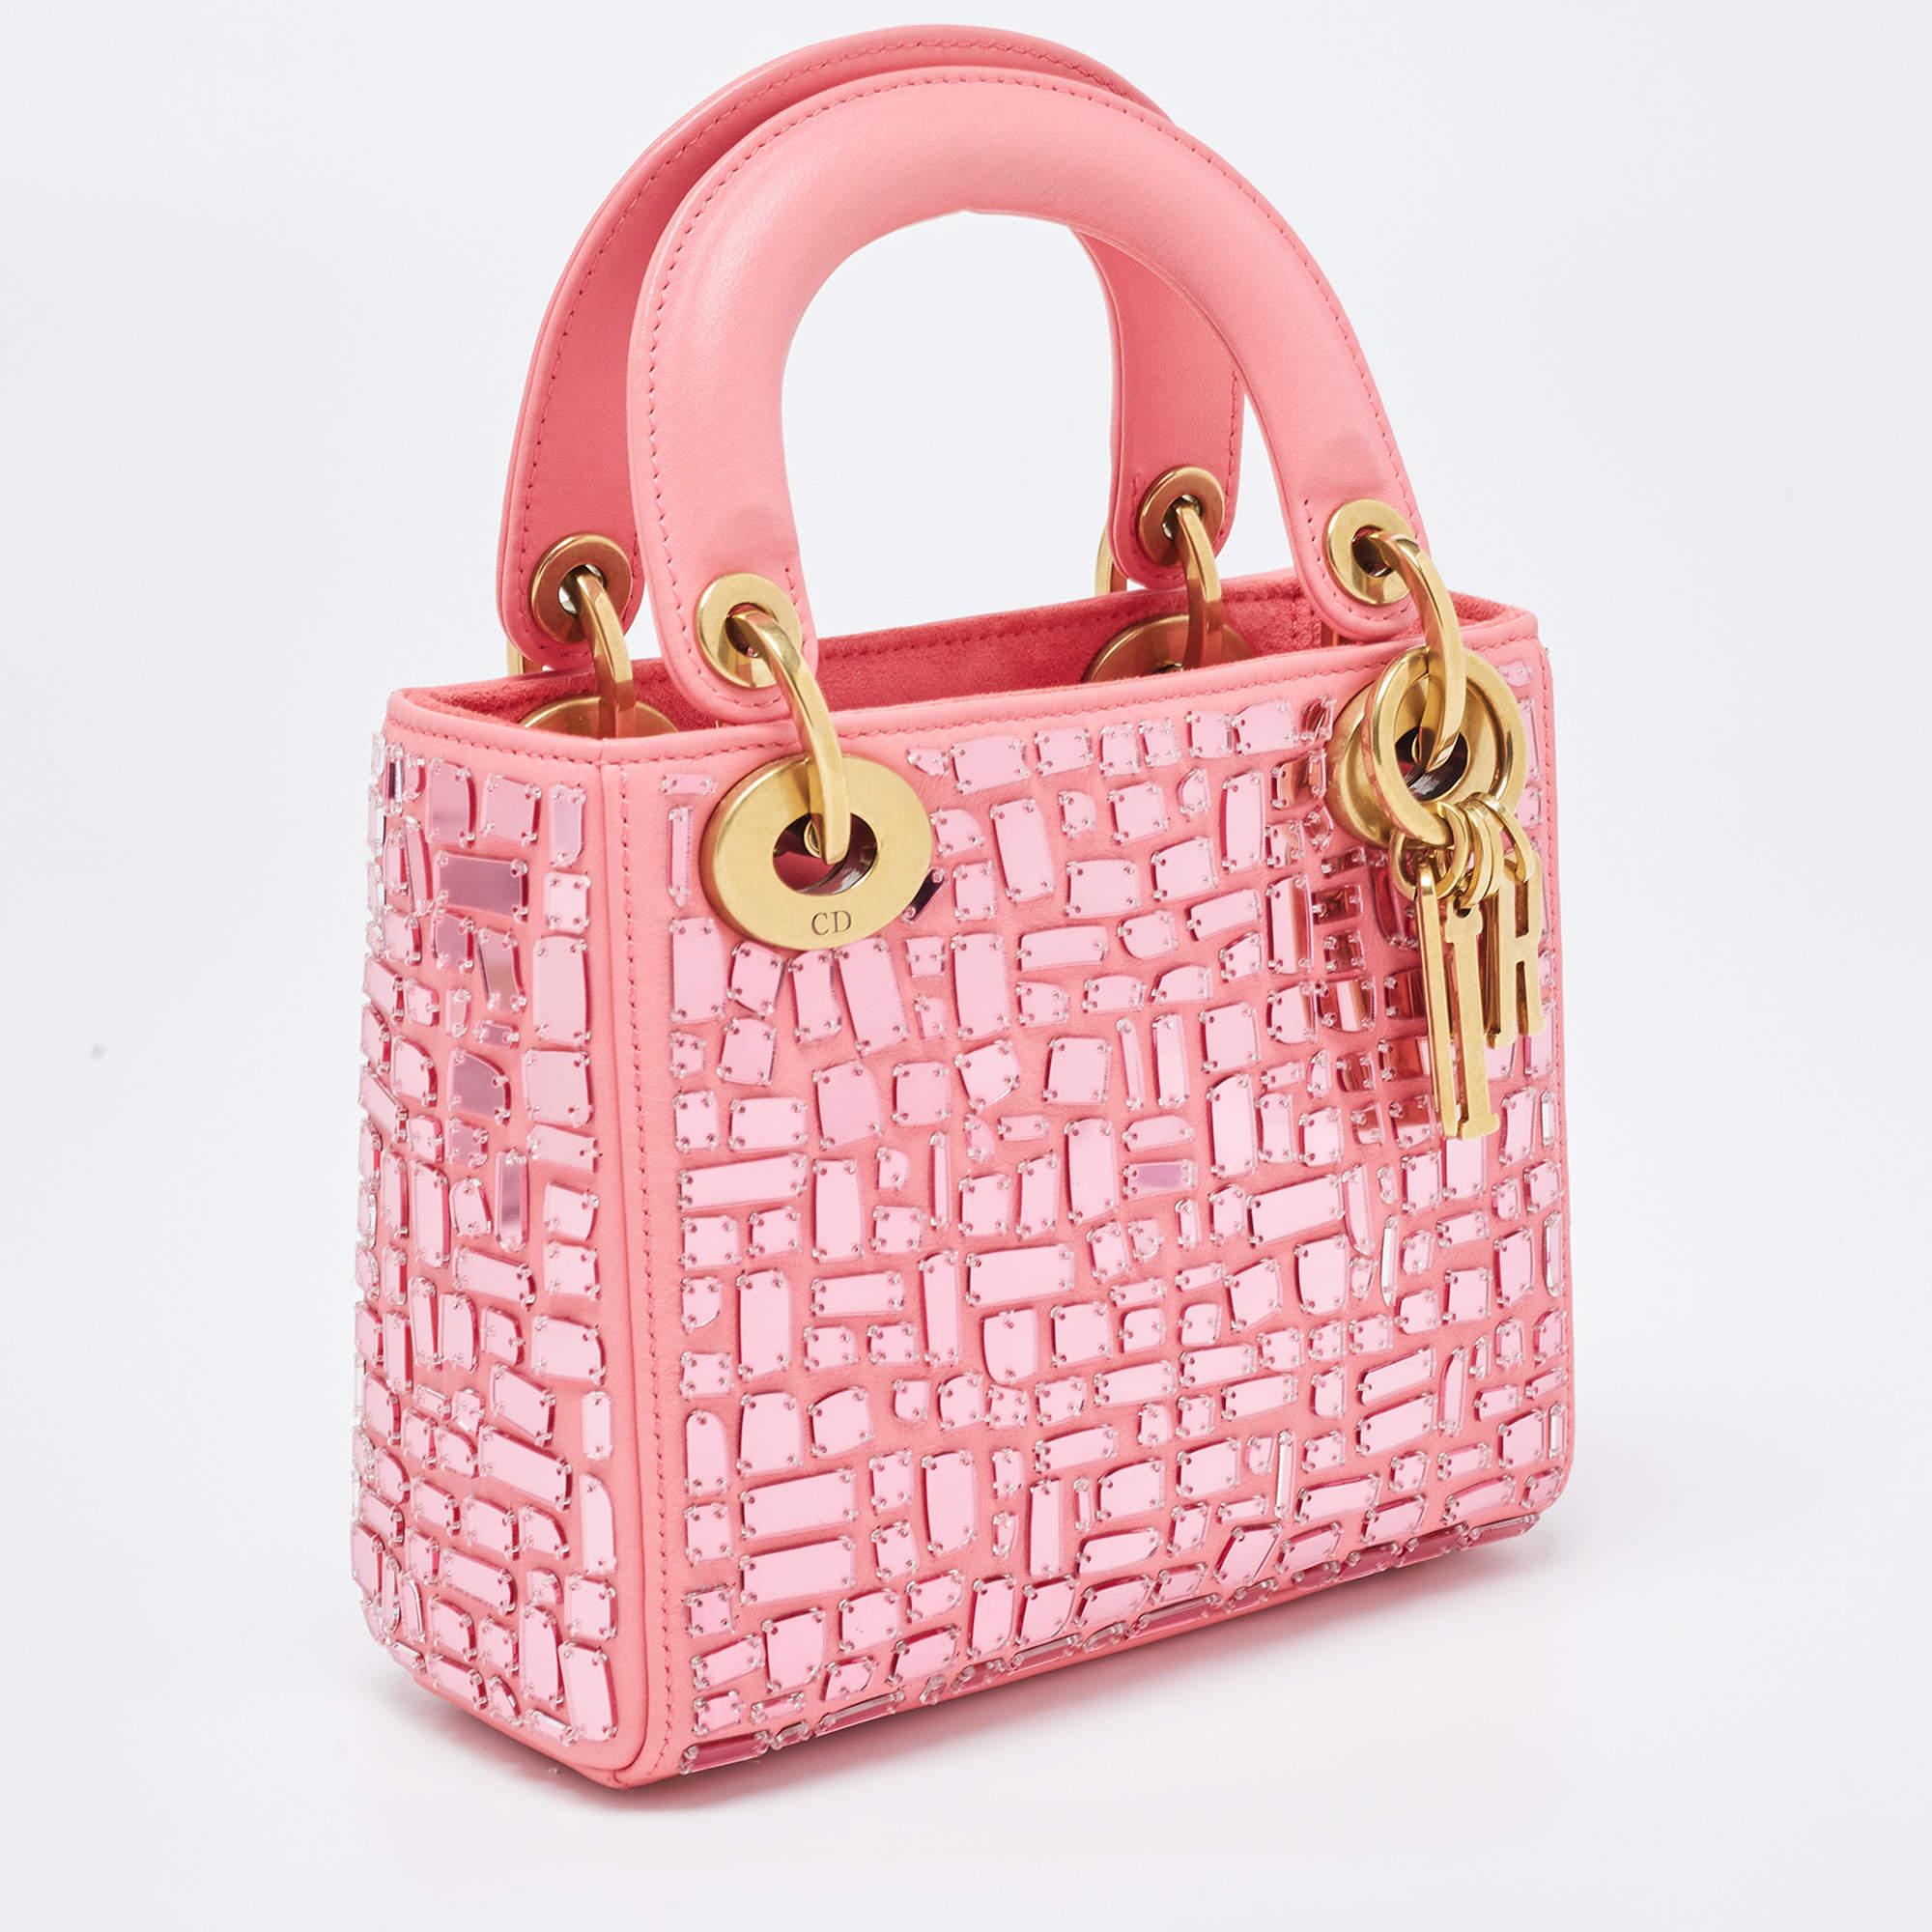 The Lady Dior tote is a luxurious and exquisite fashion accessory. Crafted from supple pink leather, it features a stunning mosaic of mirrored pieces that create a captivating visual effect. The mini size makes it perfect for on-the-go glamour,